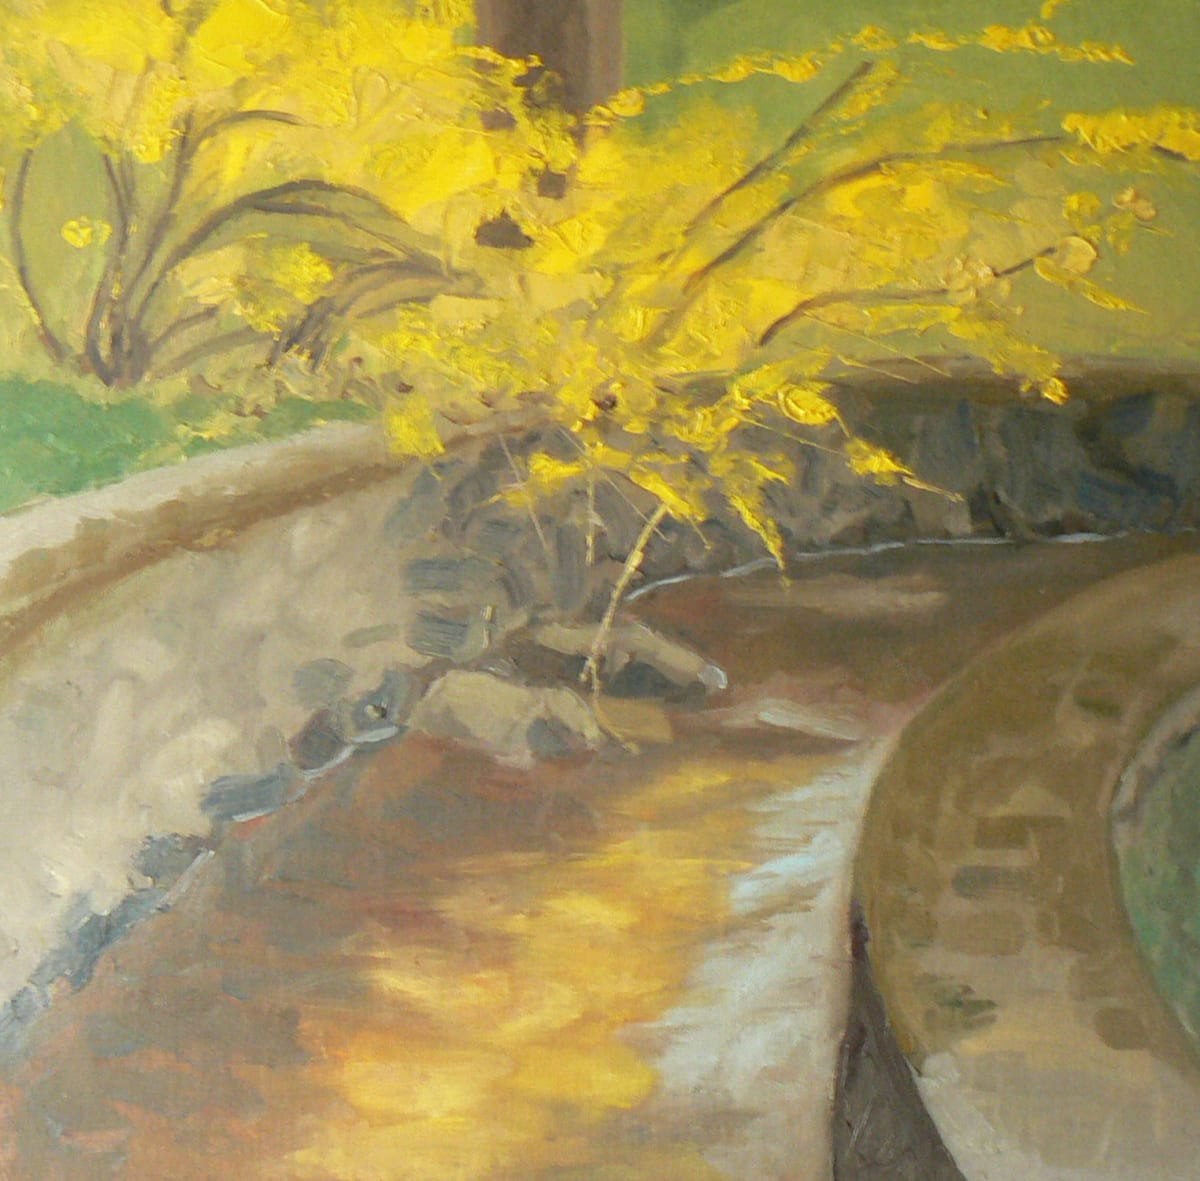 Spring Gold by Joanne McIlvaine  Image: Painted at Long's Park in spring